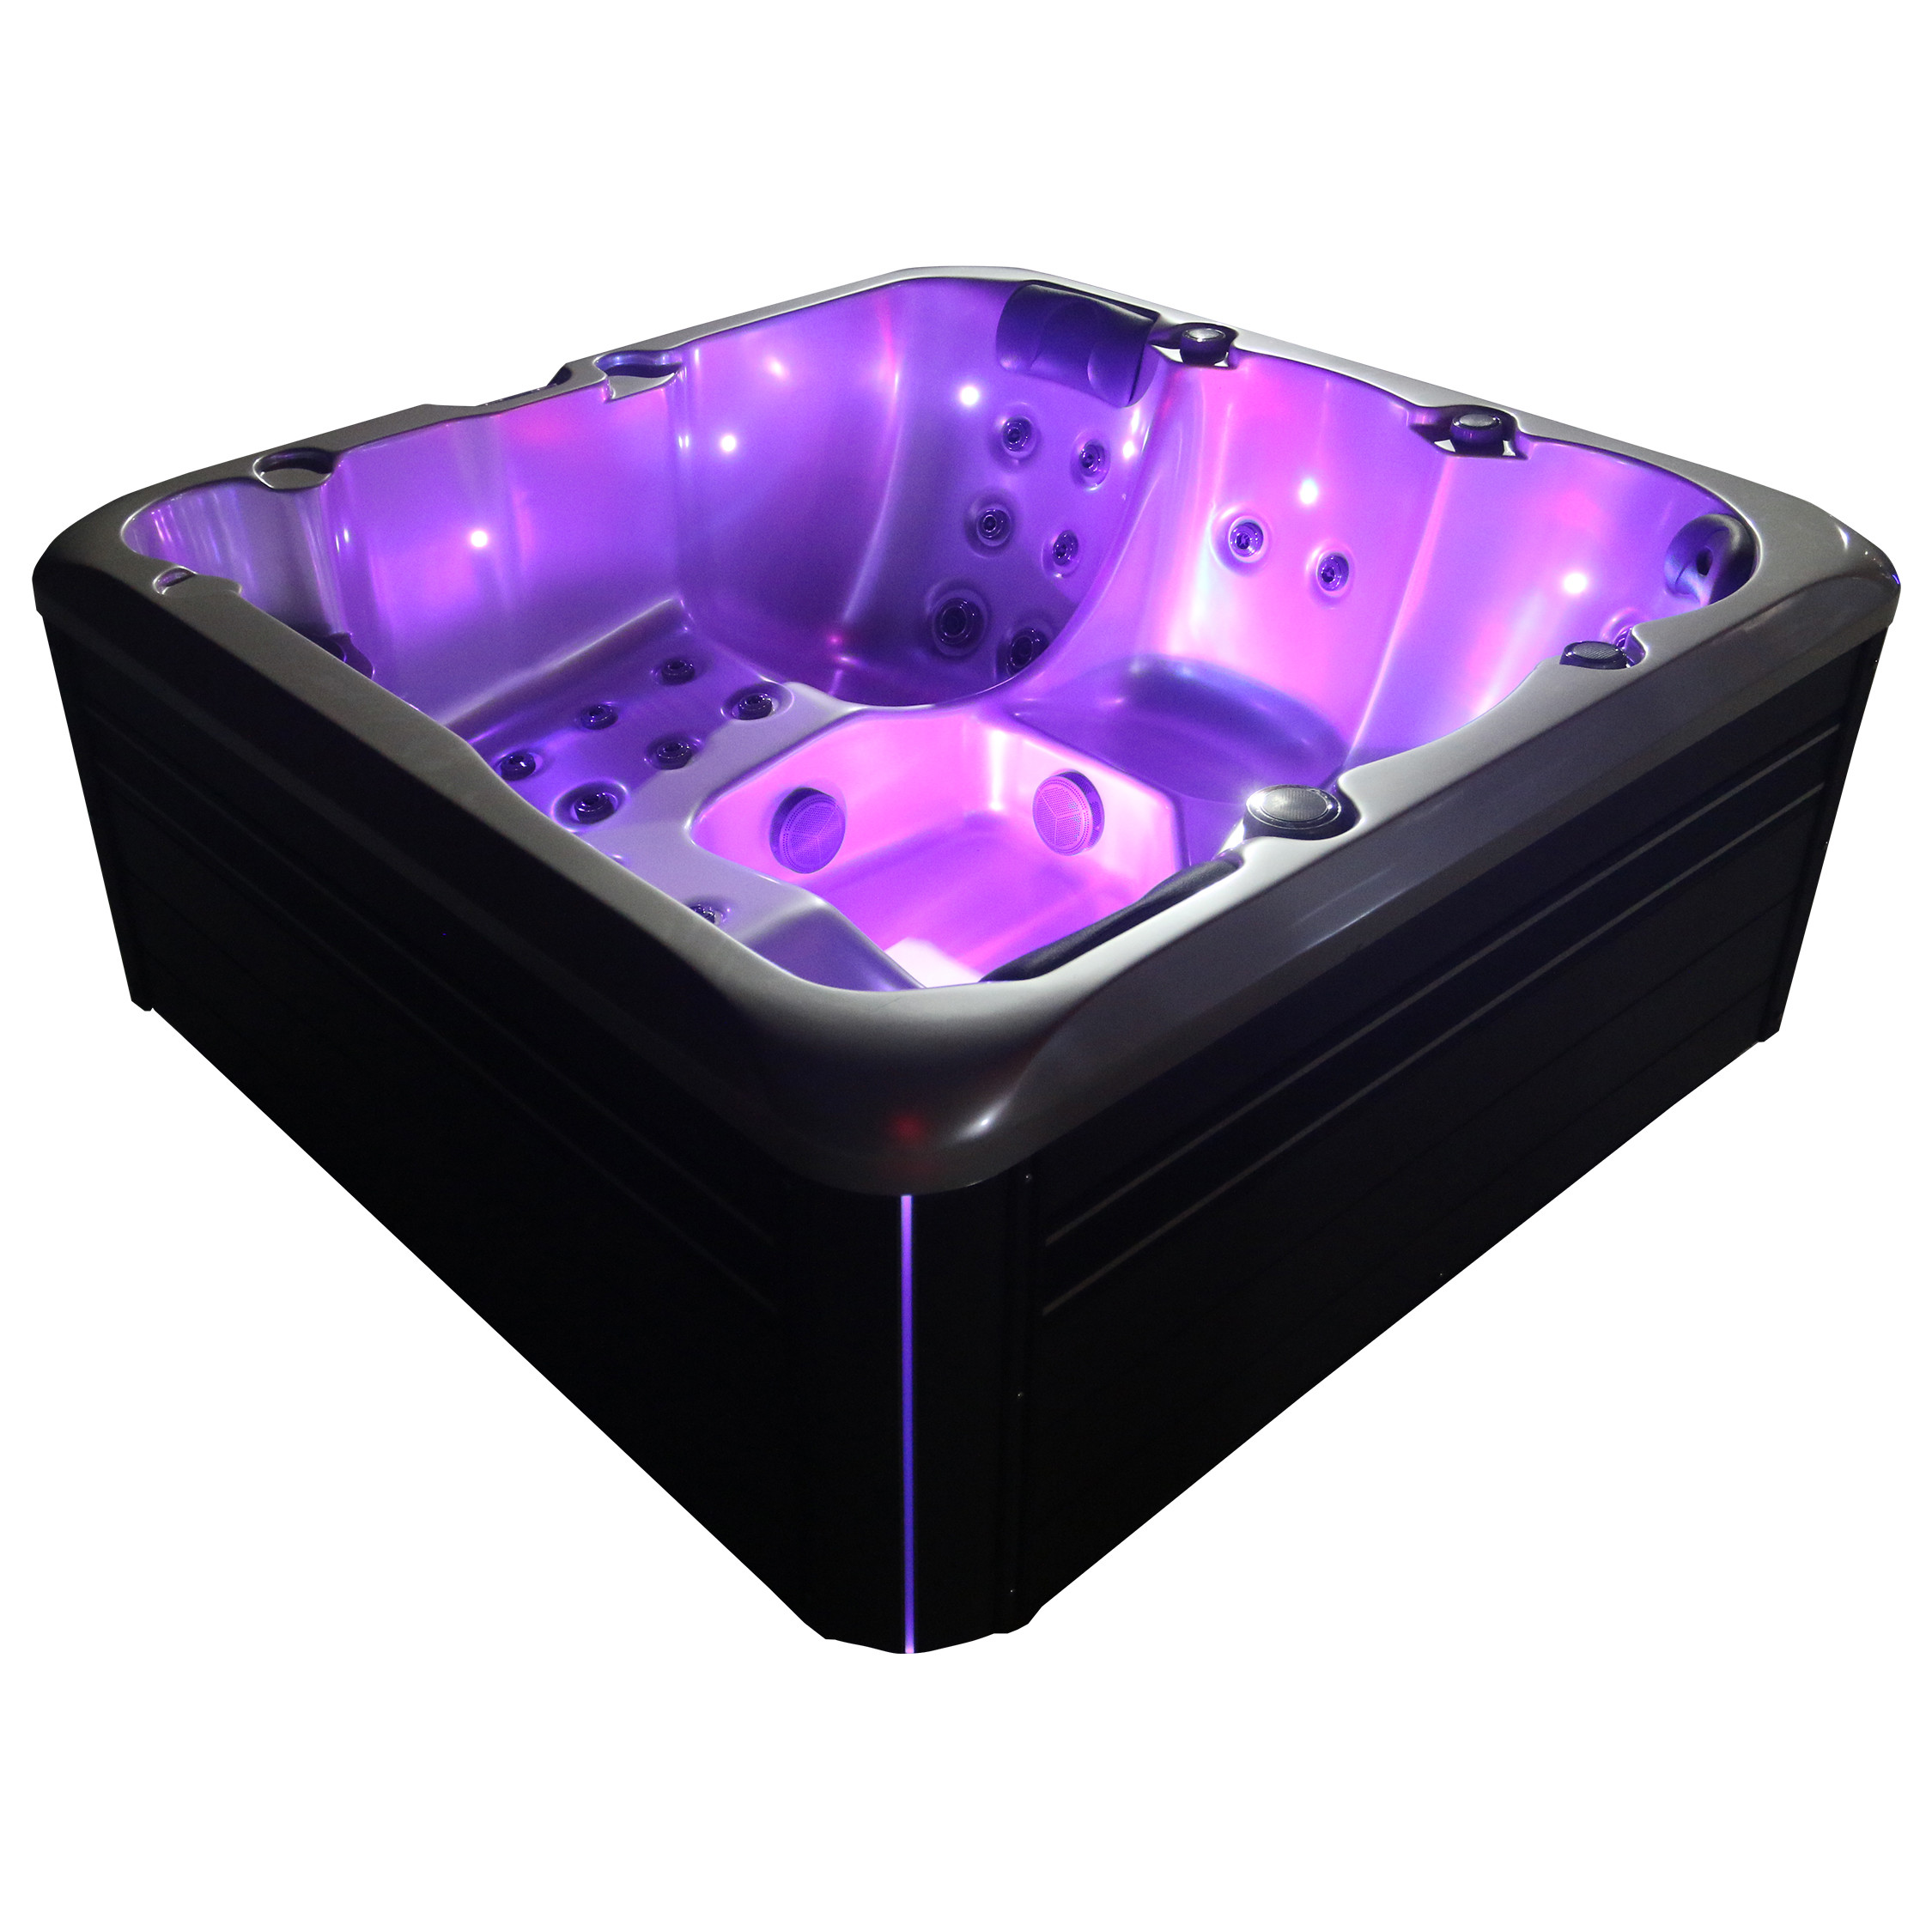  Outdoor Acrylic Hot Tub Whirlpool Massage Bathtub With cascading waterfall and colourful lights Manufactures